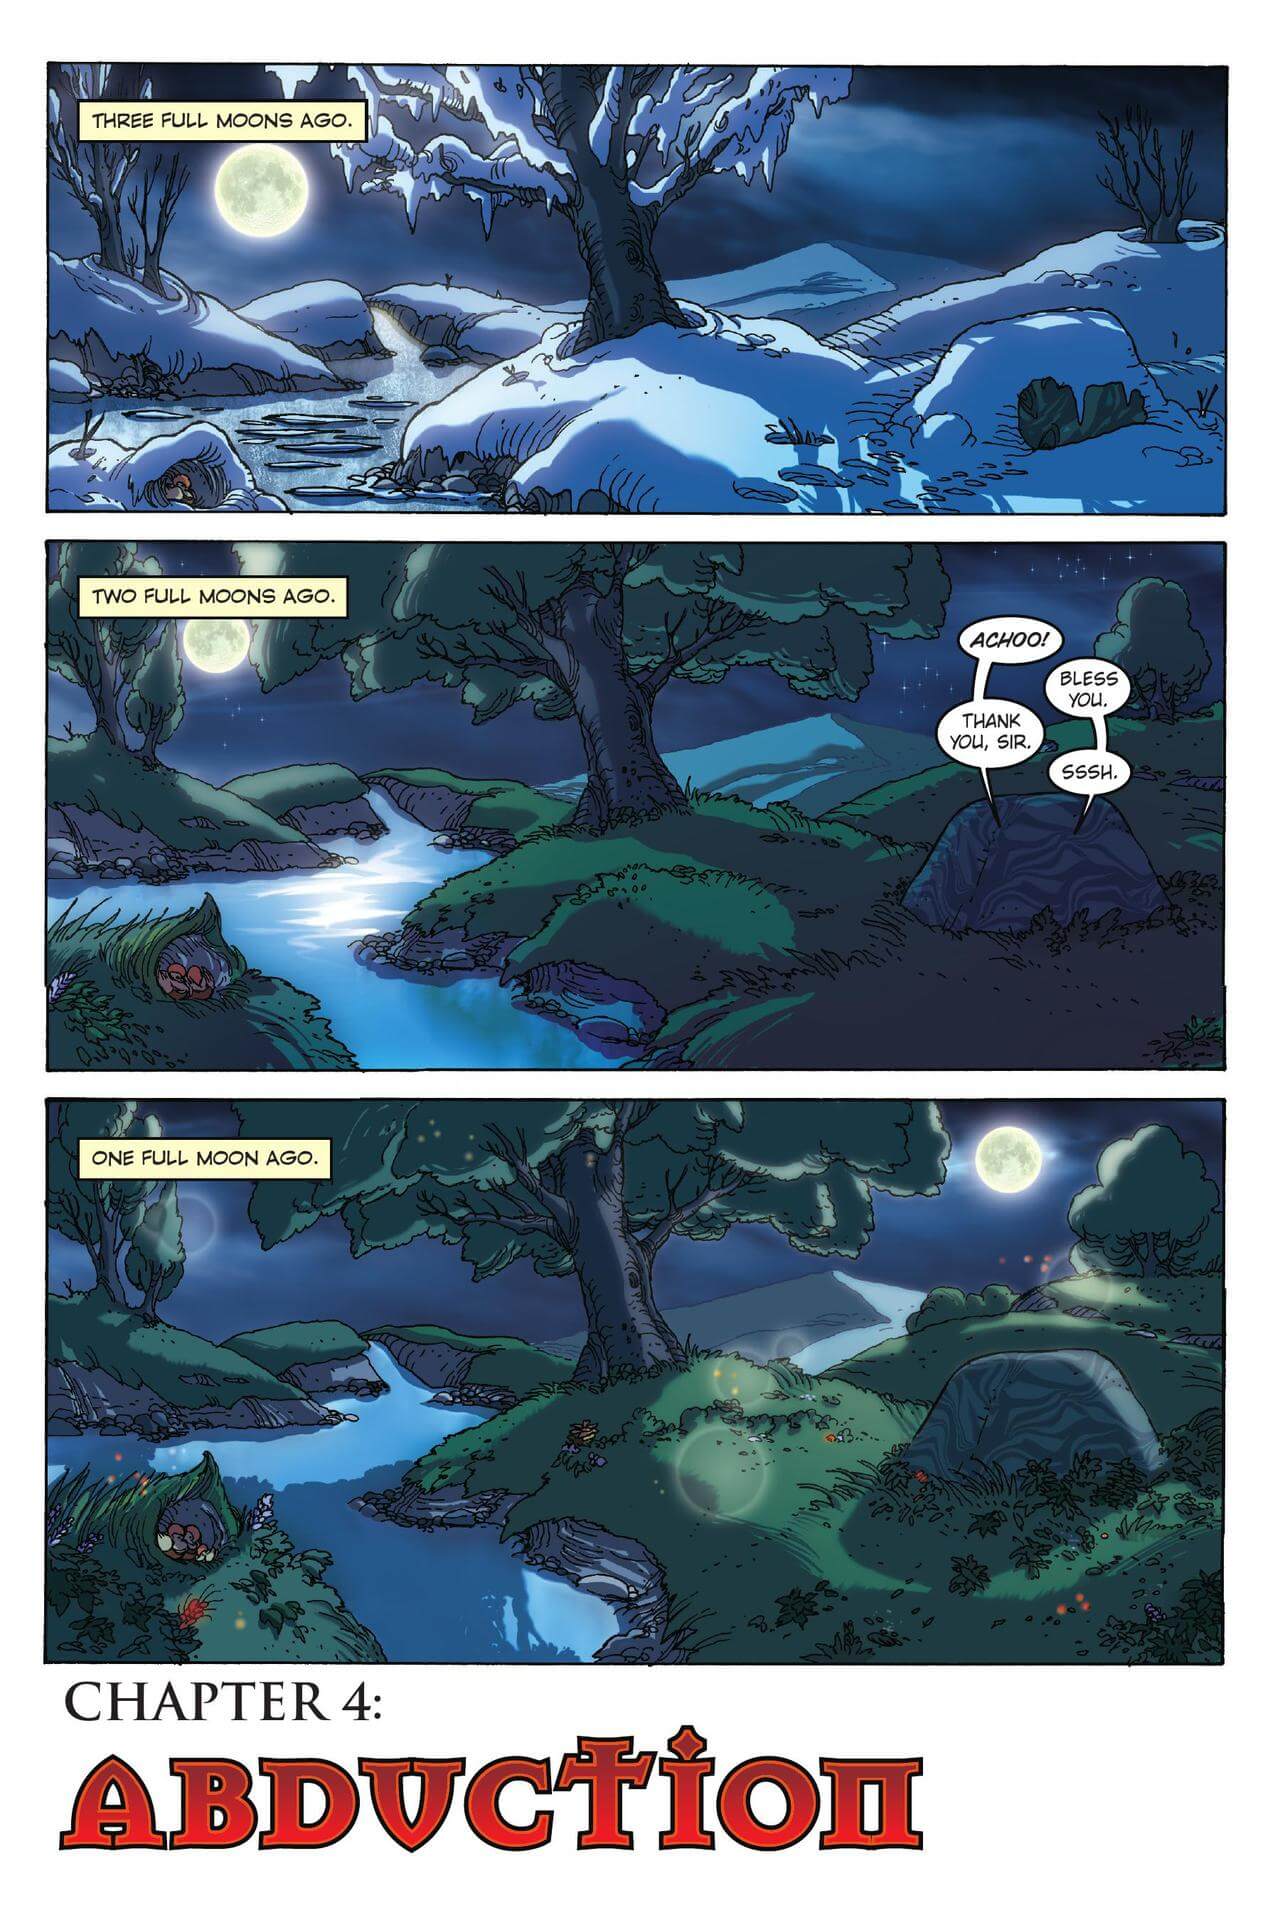 page 30 of artemis fowl the graphic novel